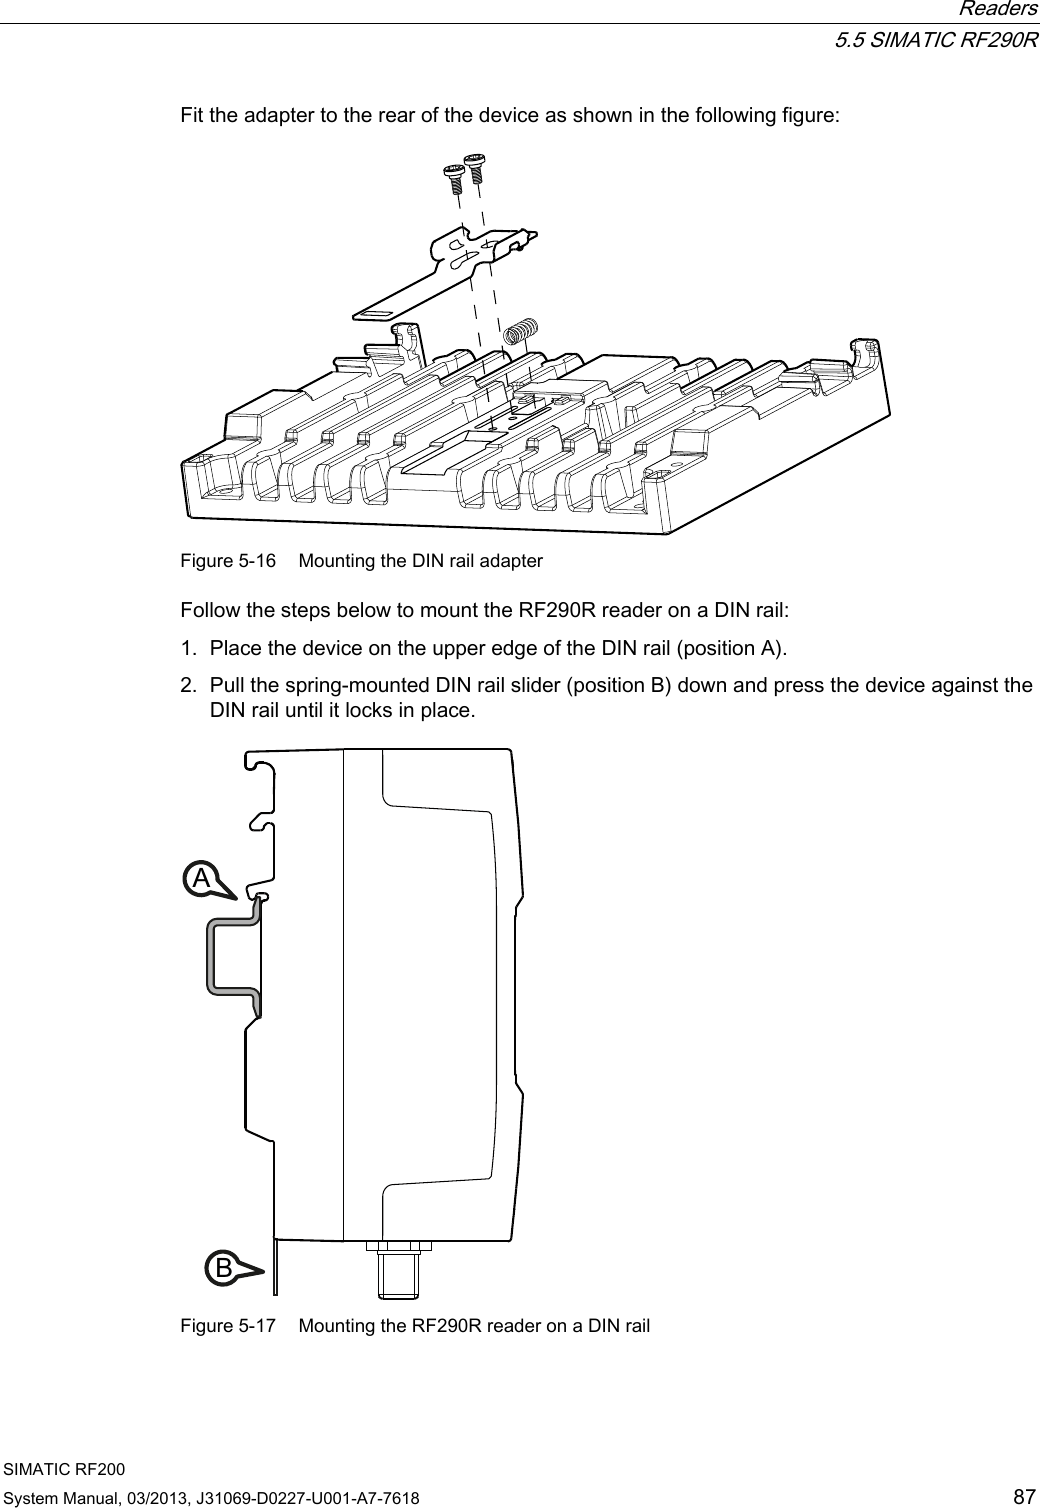  Readers  5.5 SIMATIC RF290R SIMATIC RF200 System Manual, 03/2013, J31069-D0227-U001-A7-7618  87 Fit the adapter to the rear of the device as shown in the following figure:  Figure 5-16  Mounting the DIN rail adapter Follow the steps below to mount the RF290R reader on a DIN rail: 1. Place the device on the upper edge of the DIN rail (position A). 2. Pull the spring-mounted DIN rail slider (position B) down and press the device against the DIN rail until it locks in place. AB Figure 5-17  Mounting the RF290R reader on a DIN rail 